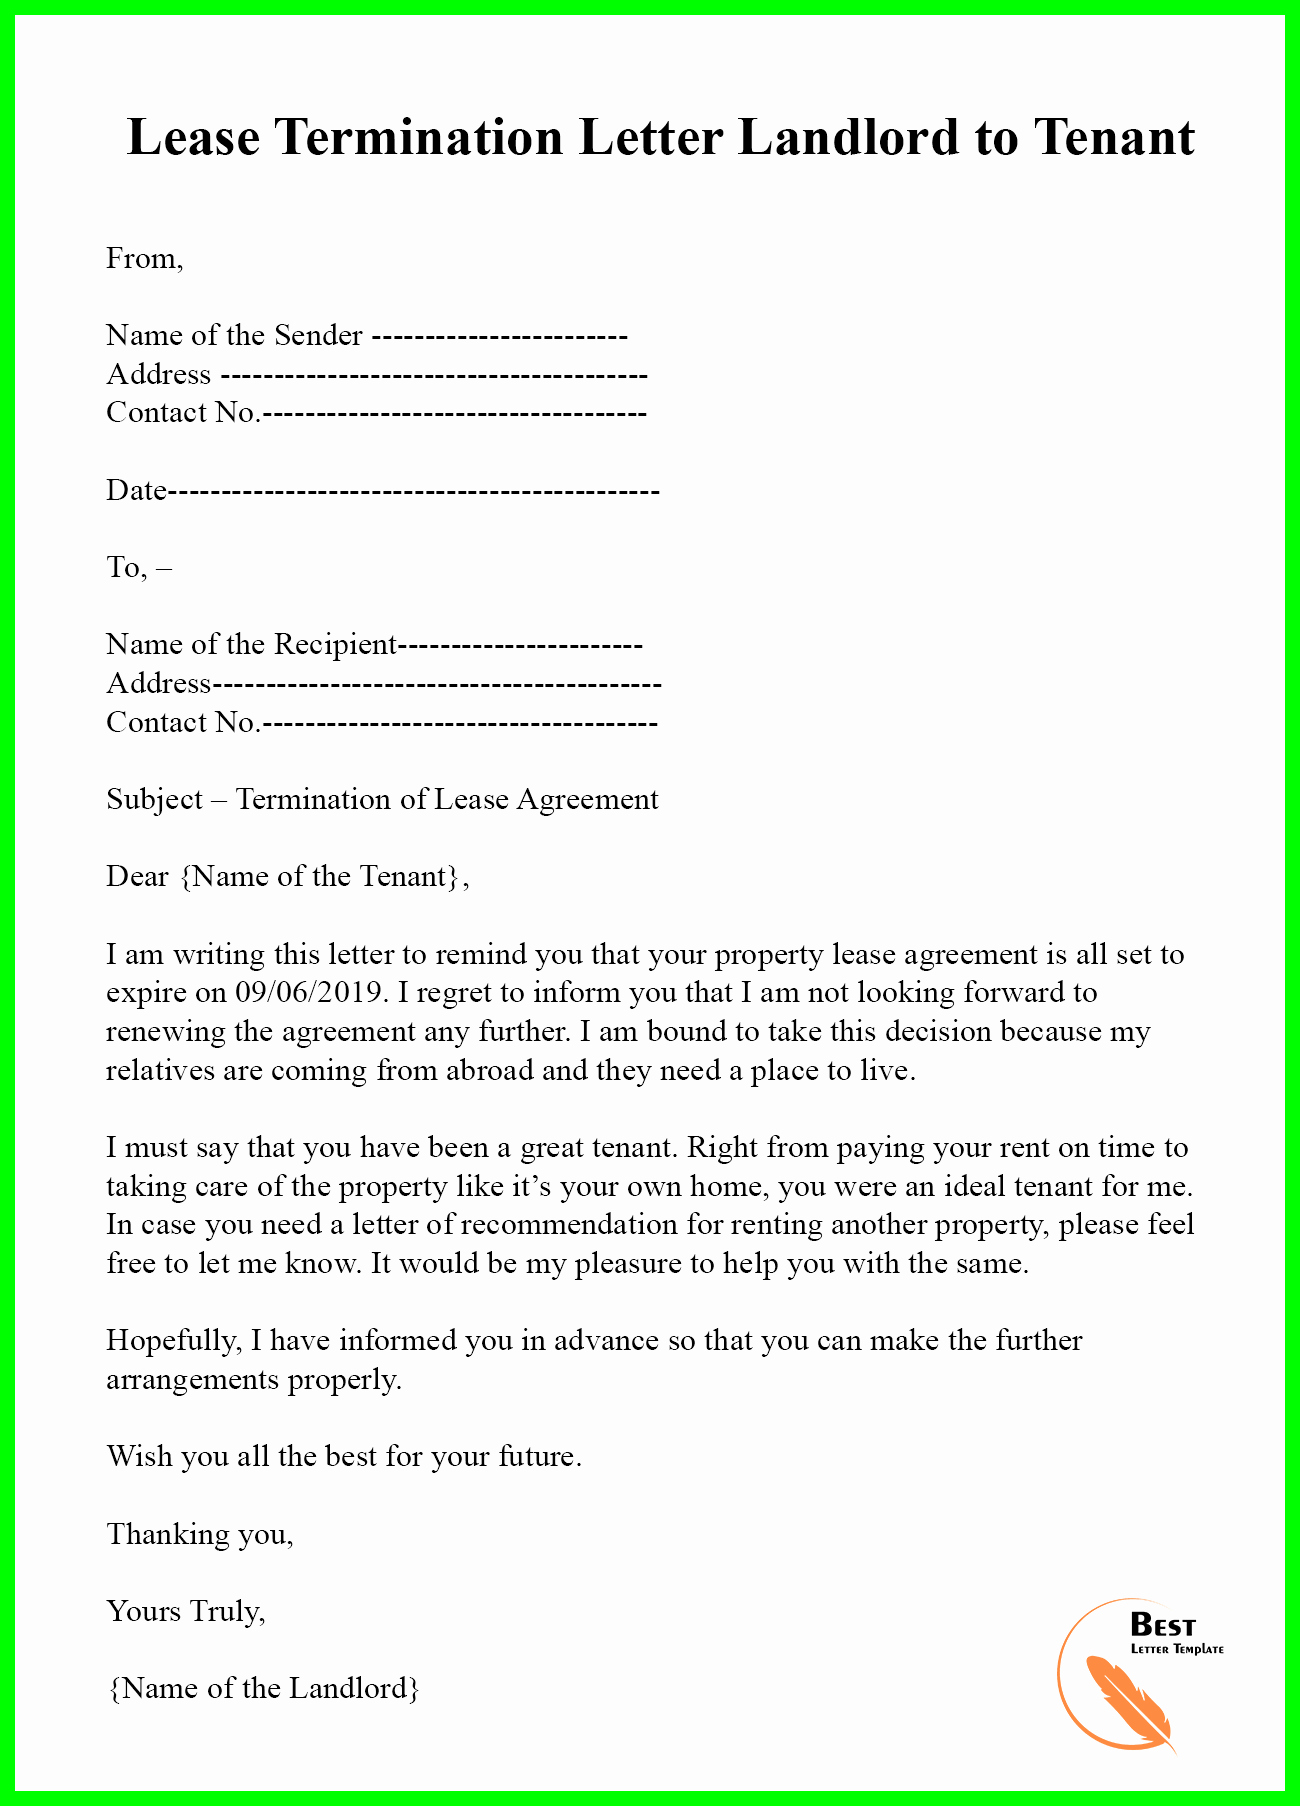 Landlord Lease Termination Letter Fresh Lease Termination Letter Template – format Sample &amp; Example